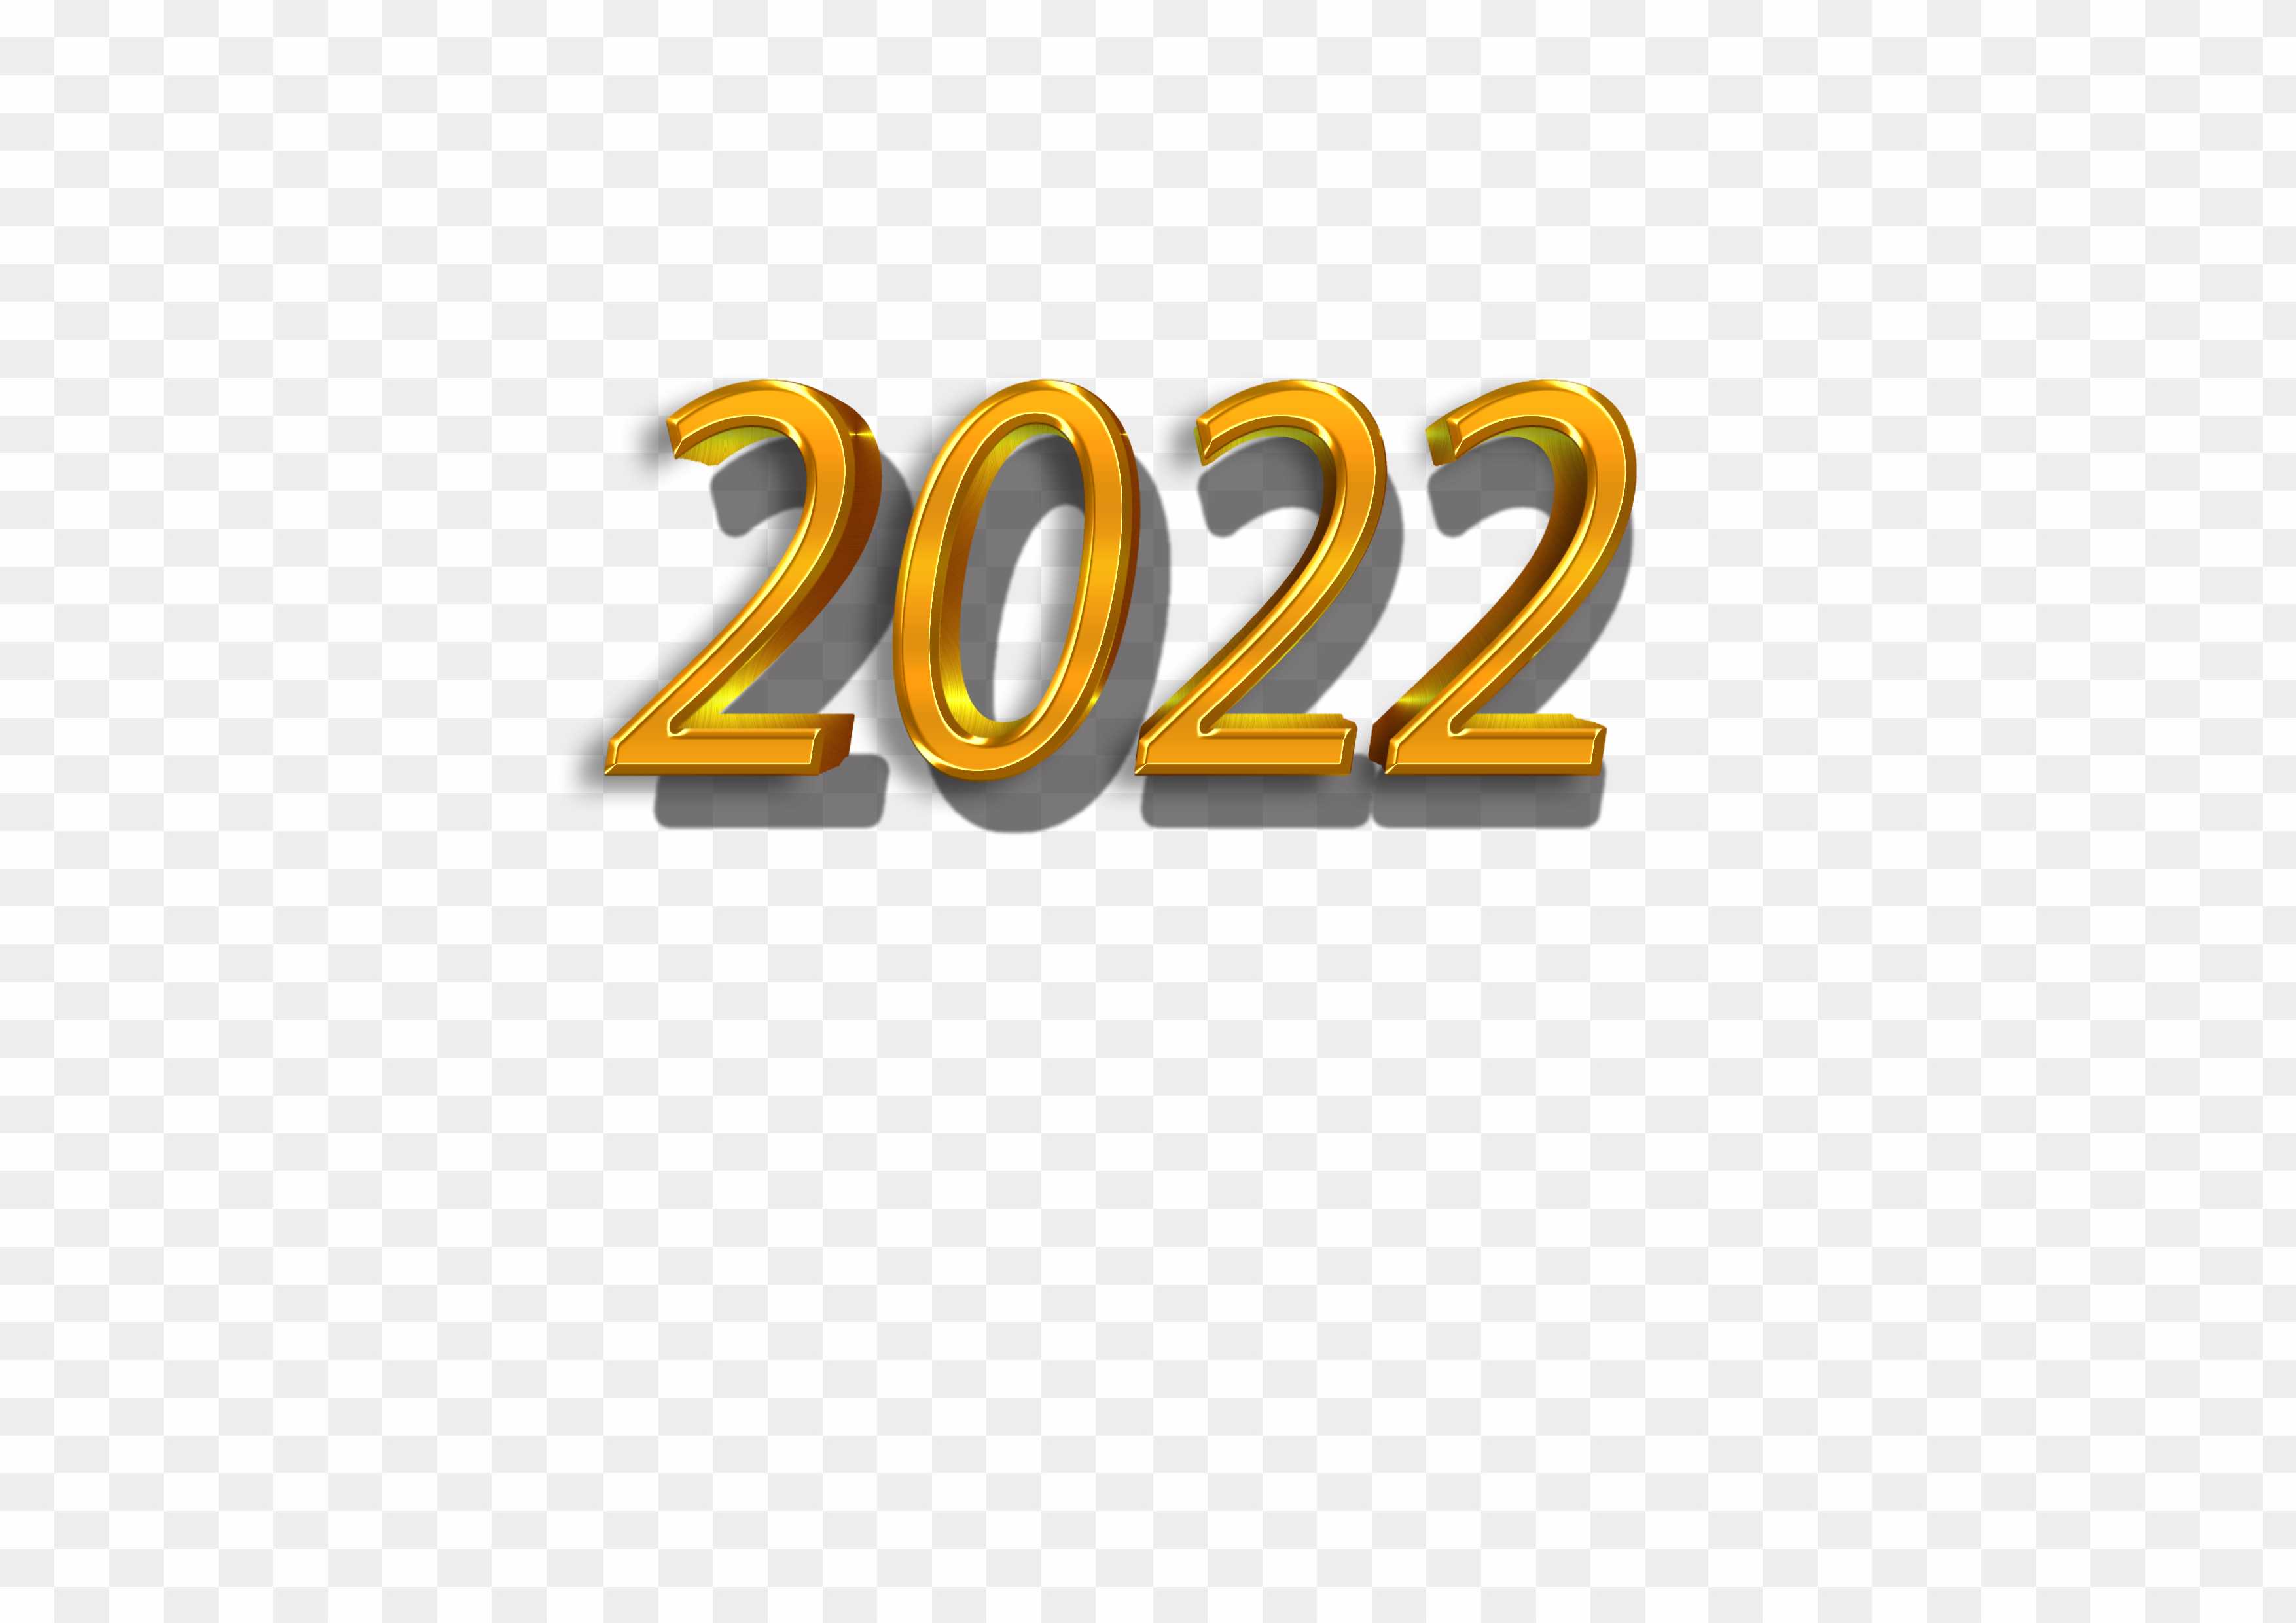 New Year 2022 PNG Image Free